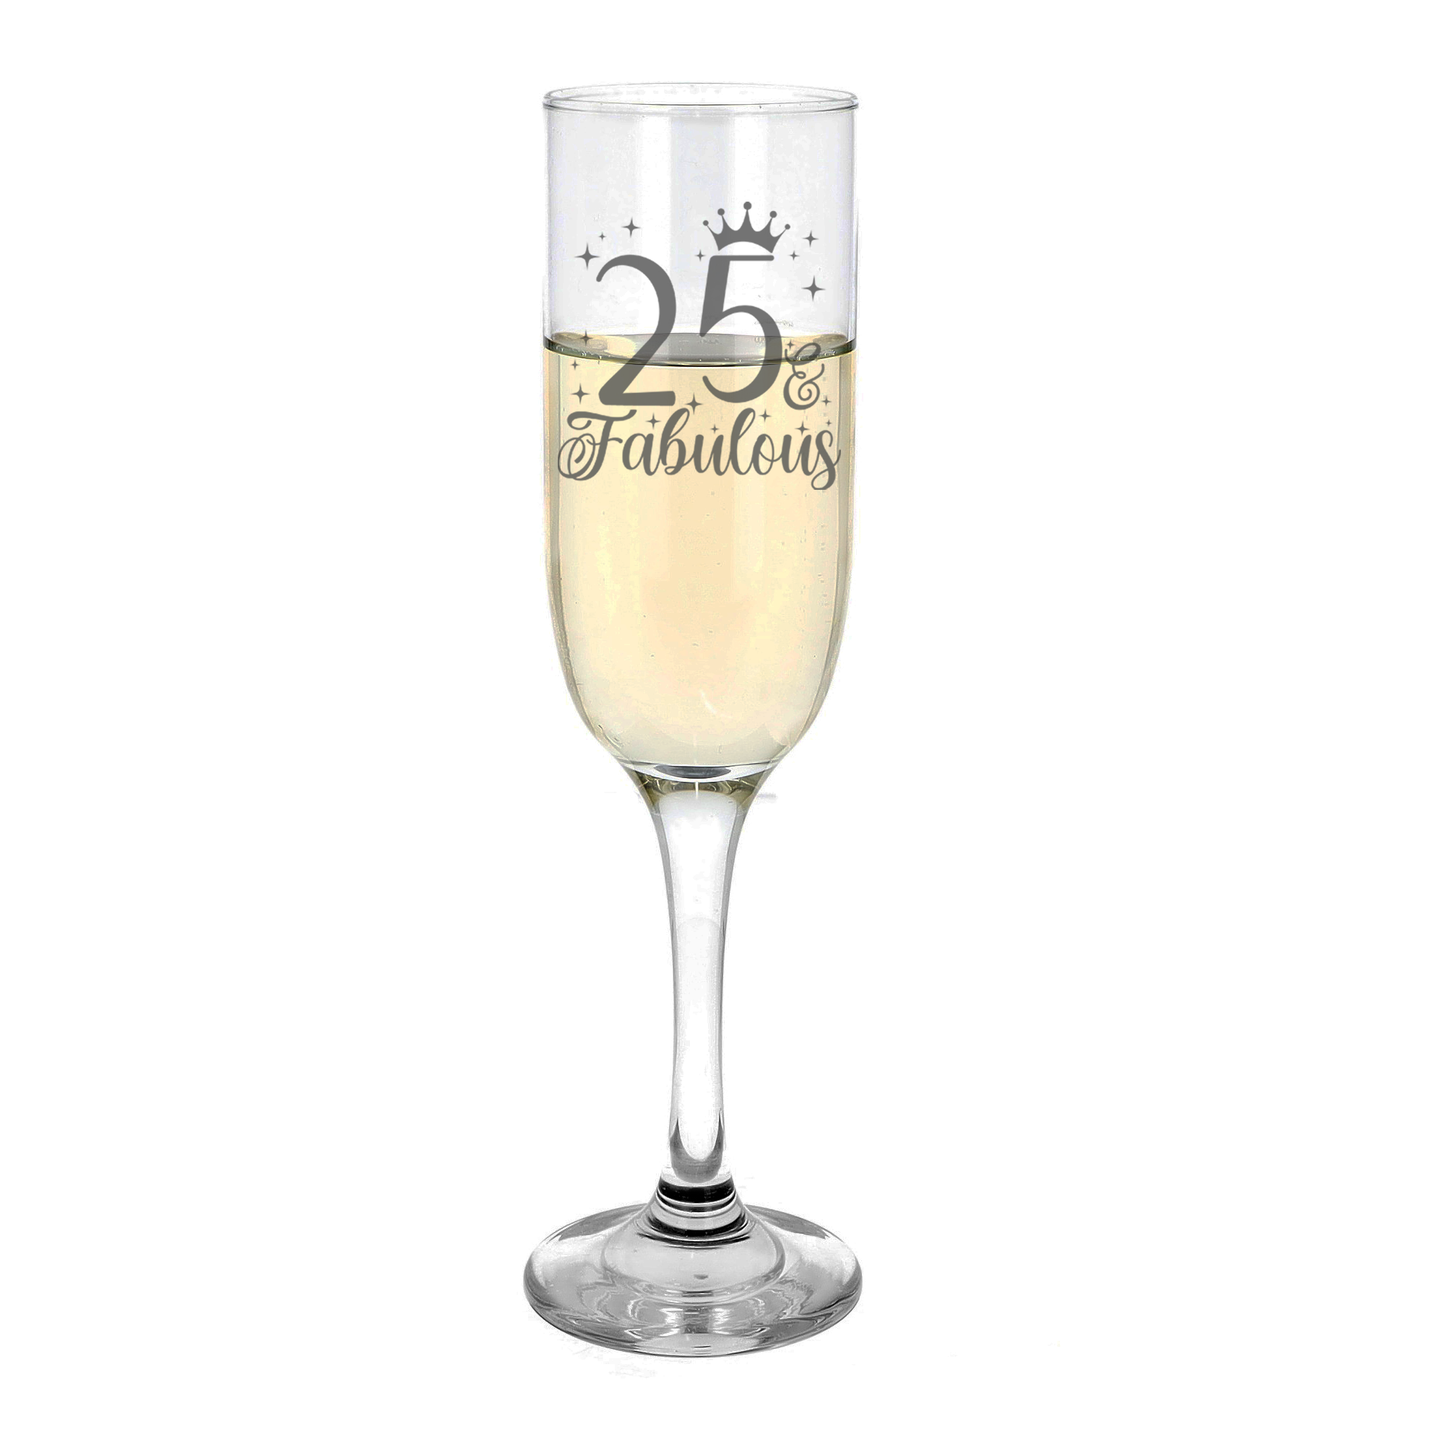 25 & Fabulous Engraved Champagne Glass and/or Coaster Set  - Always Looking Good -   